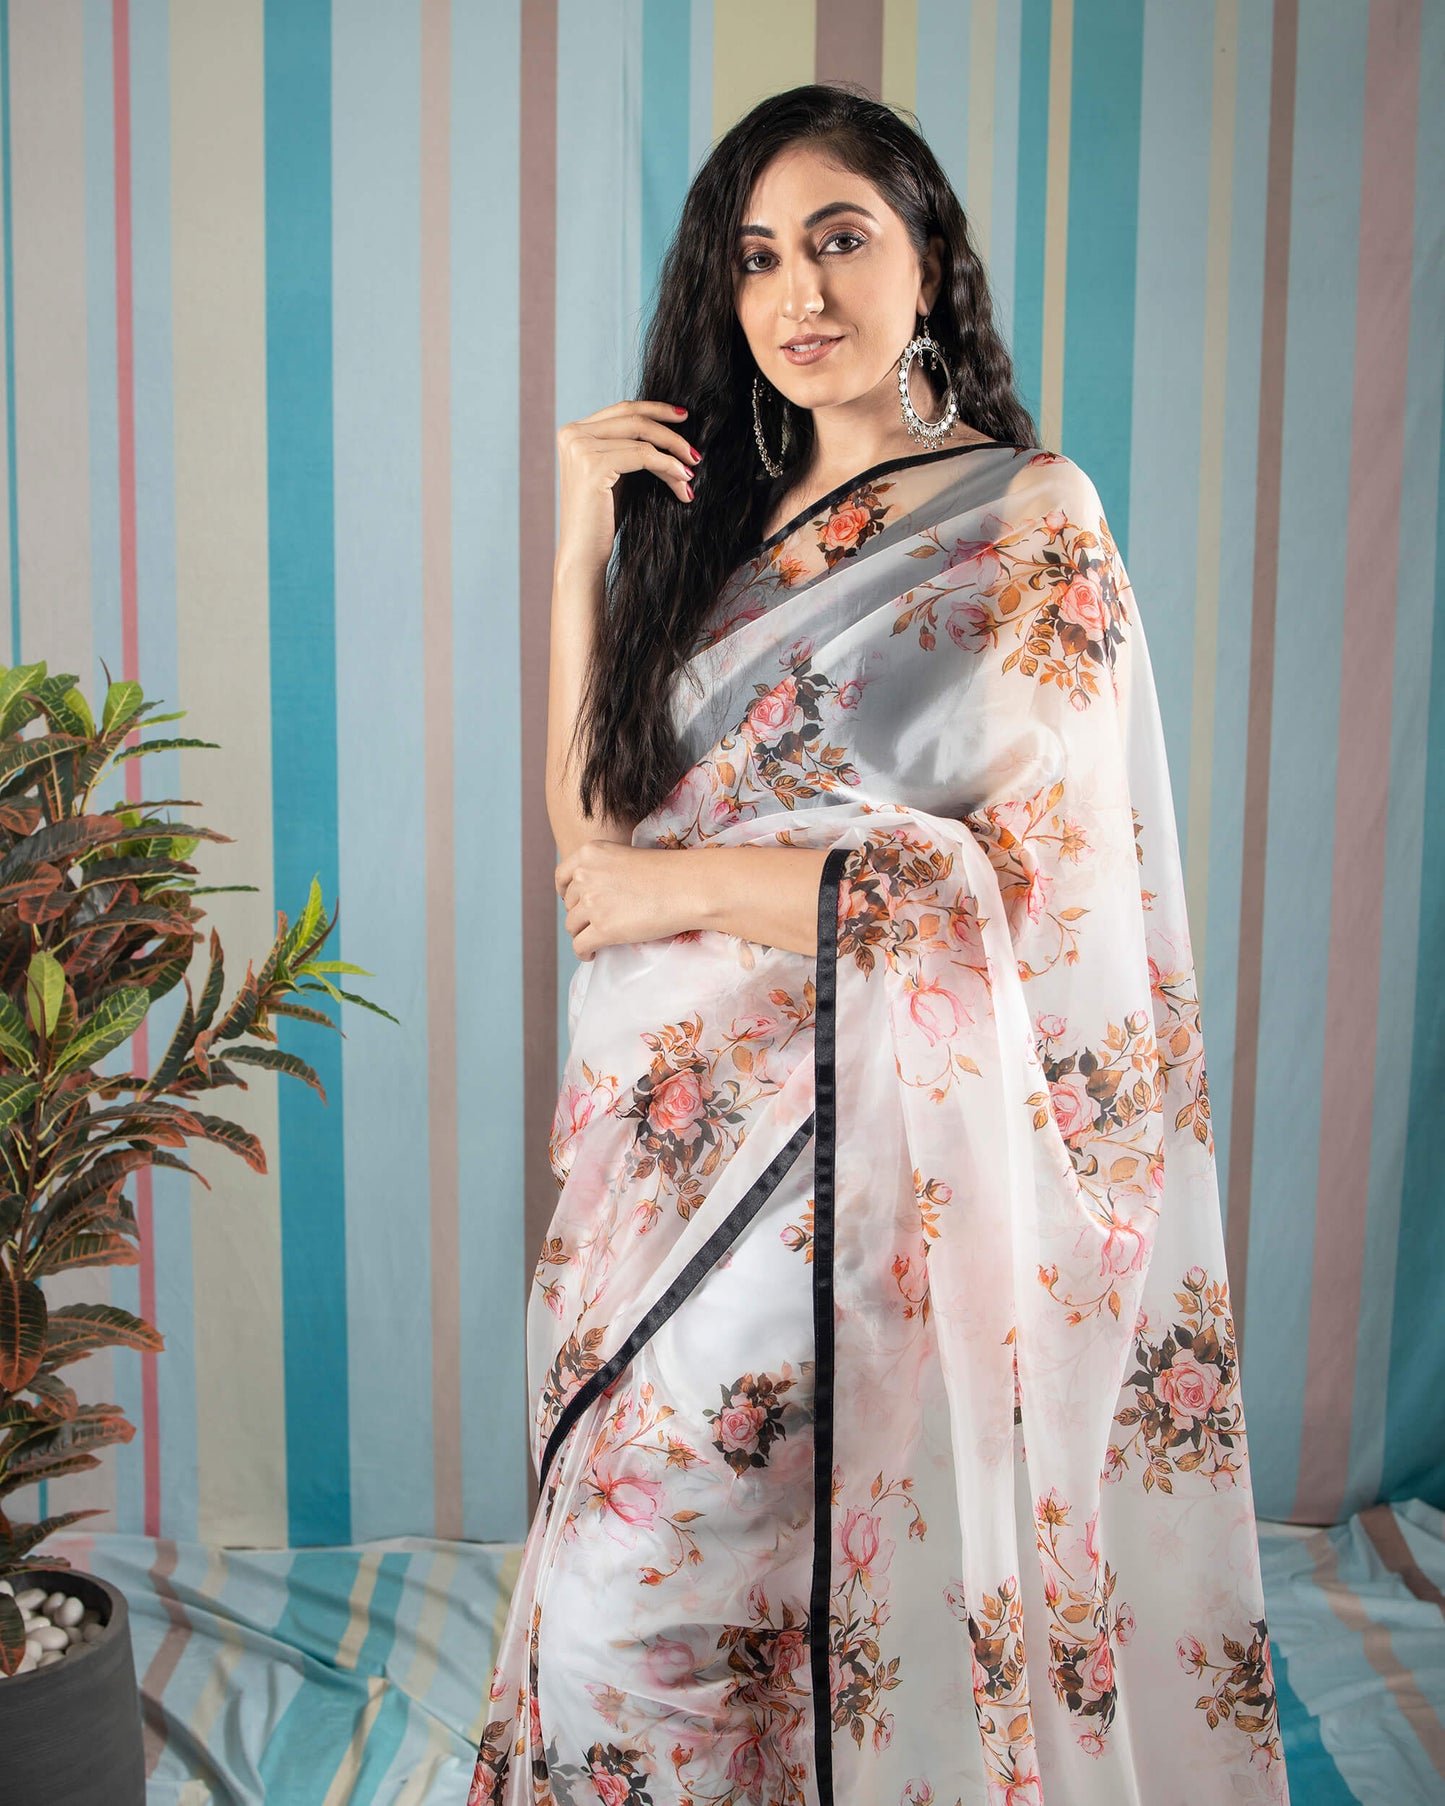 White And Taffy Pink Floral Pattern Liquid Organza Saree With Satin Border